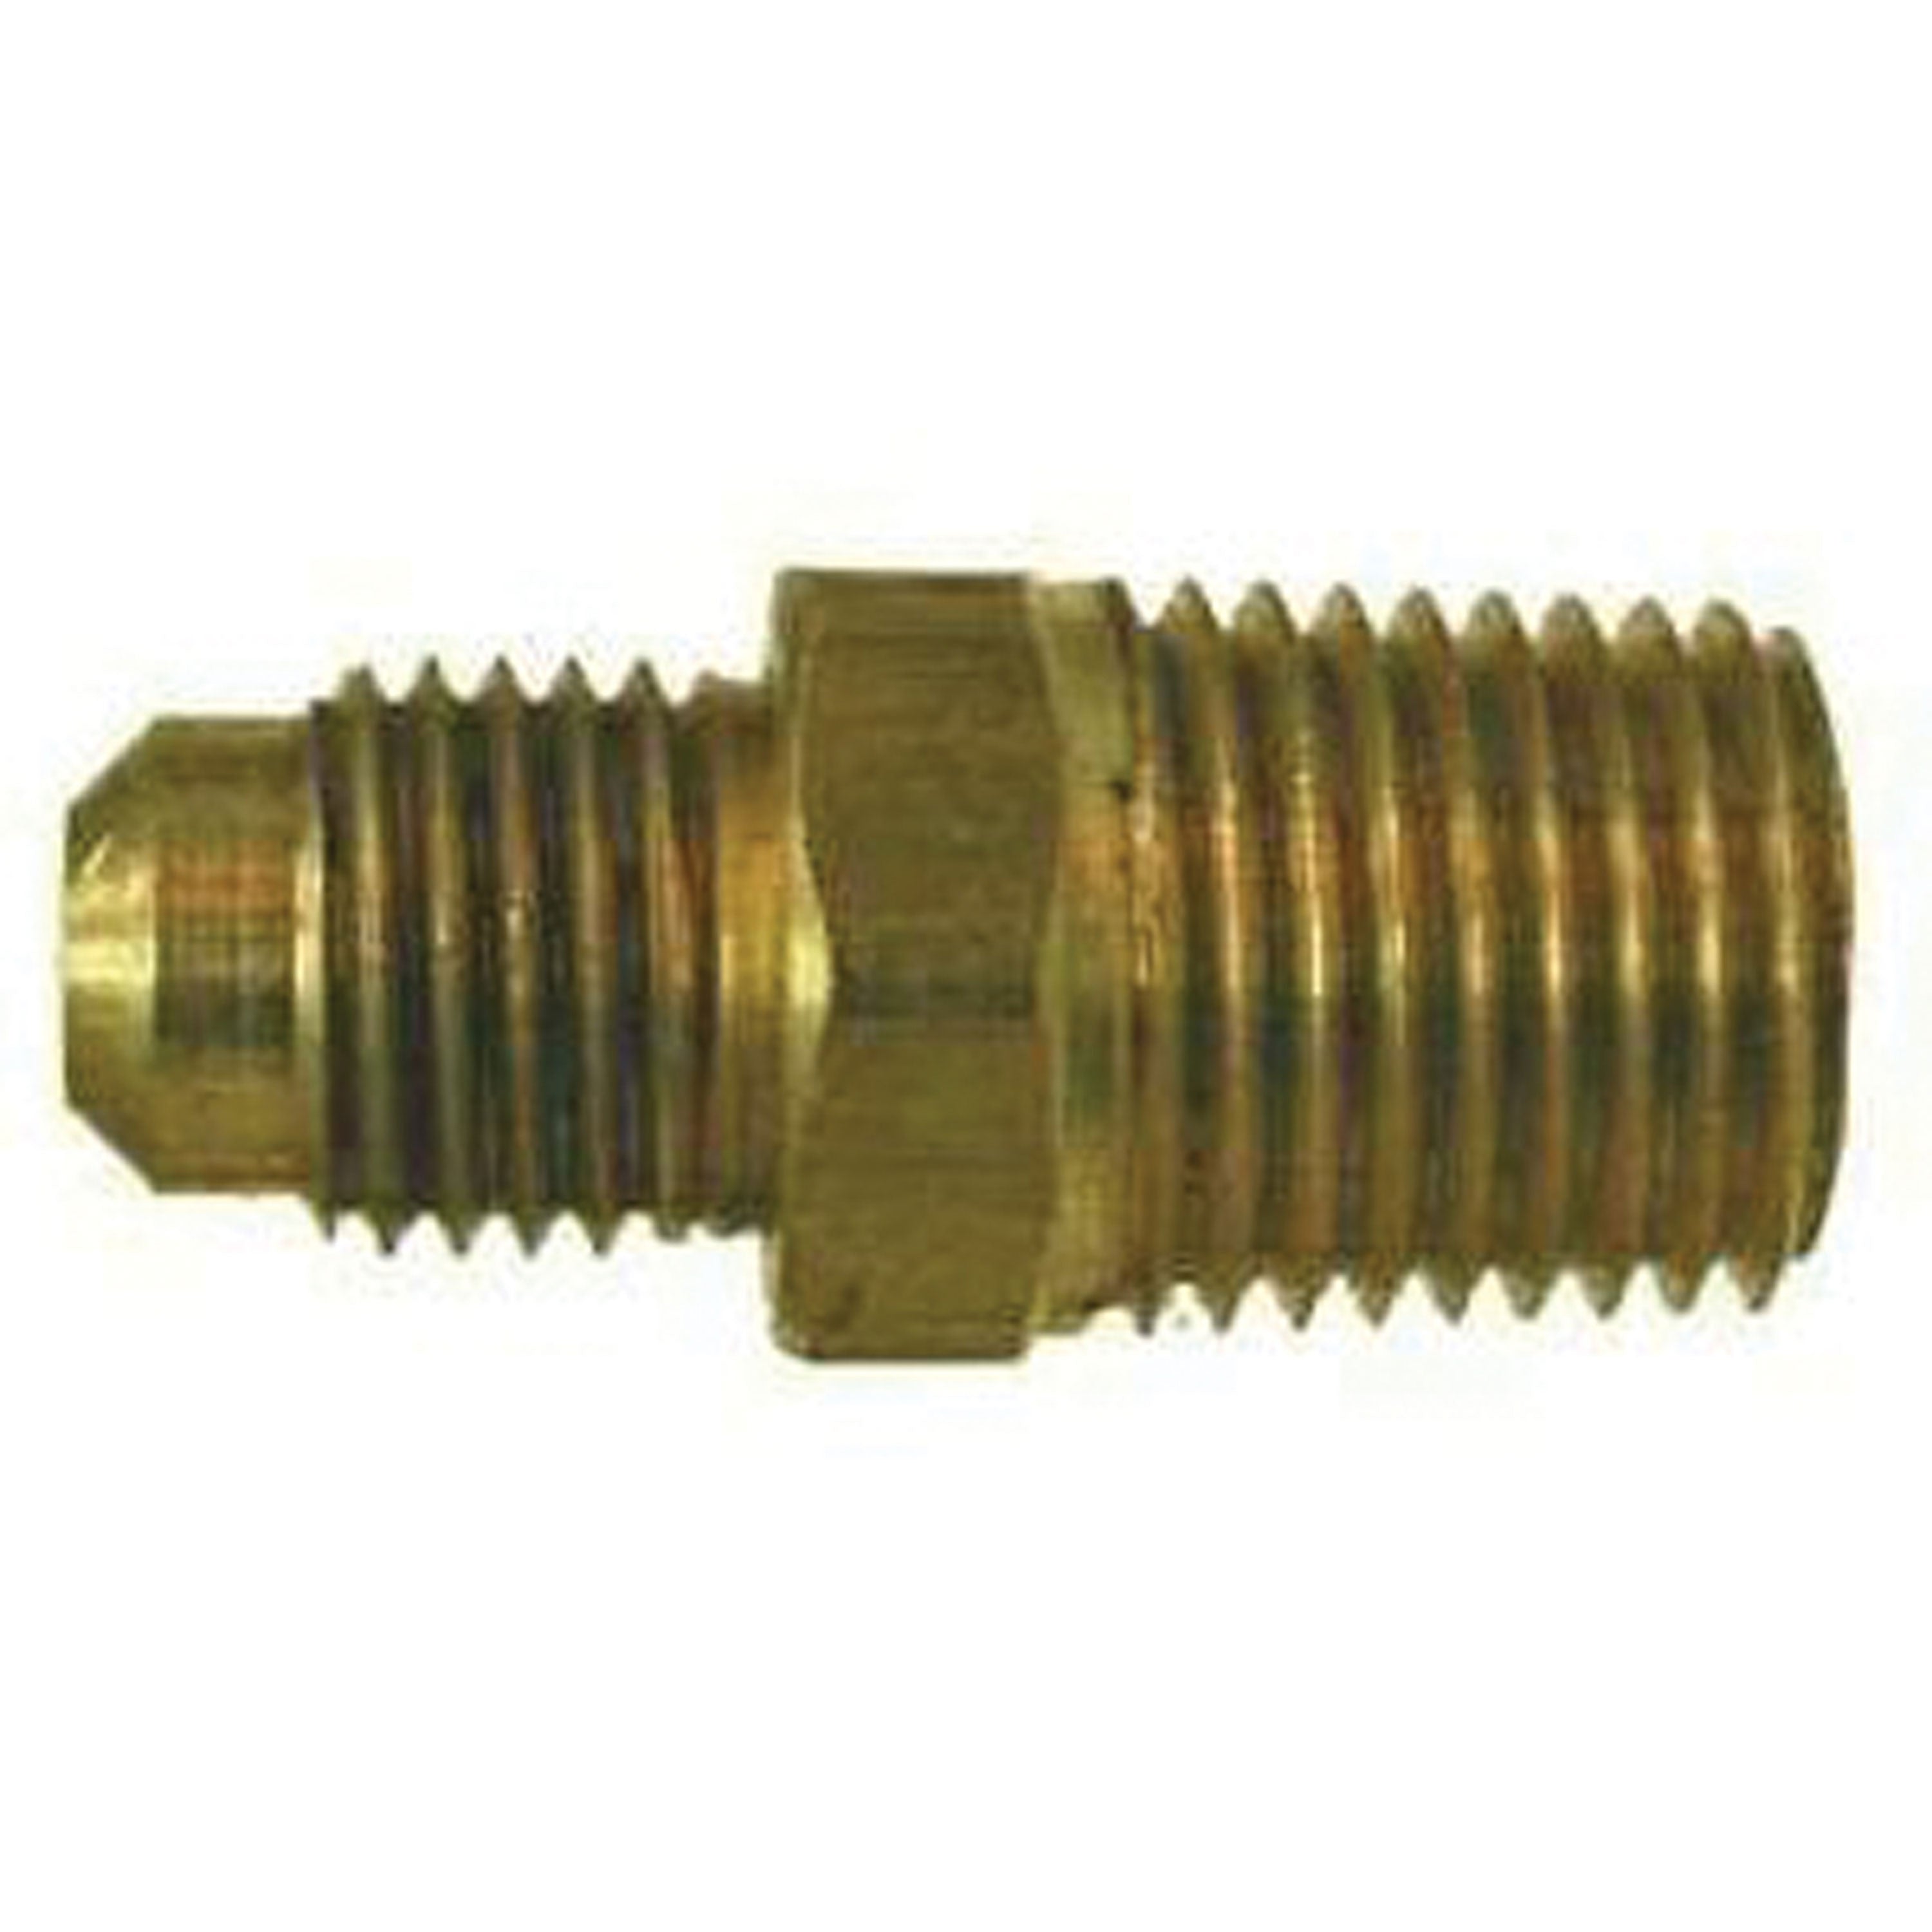 Midland Metal 10-270 SAE 45 Degree Male Adapter Male Flare x Male NPTF - 1/2 in. x 3/4 in., Each